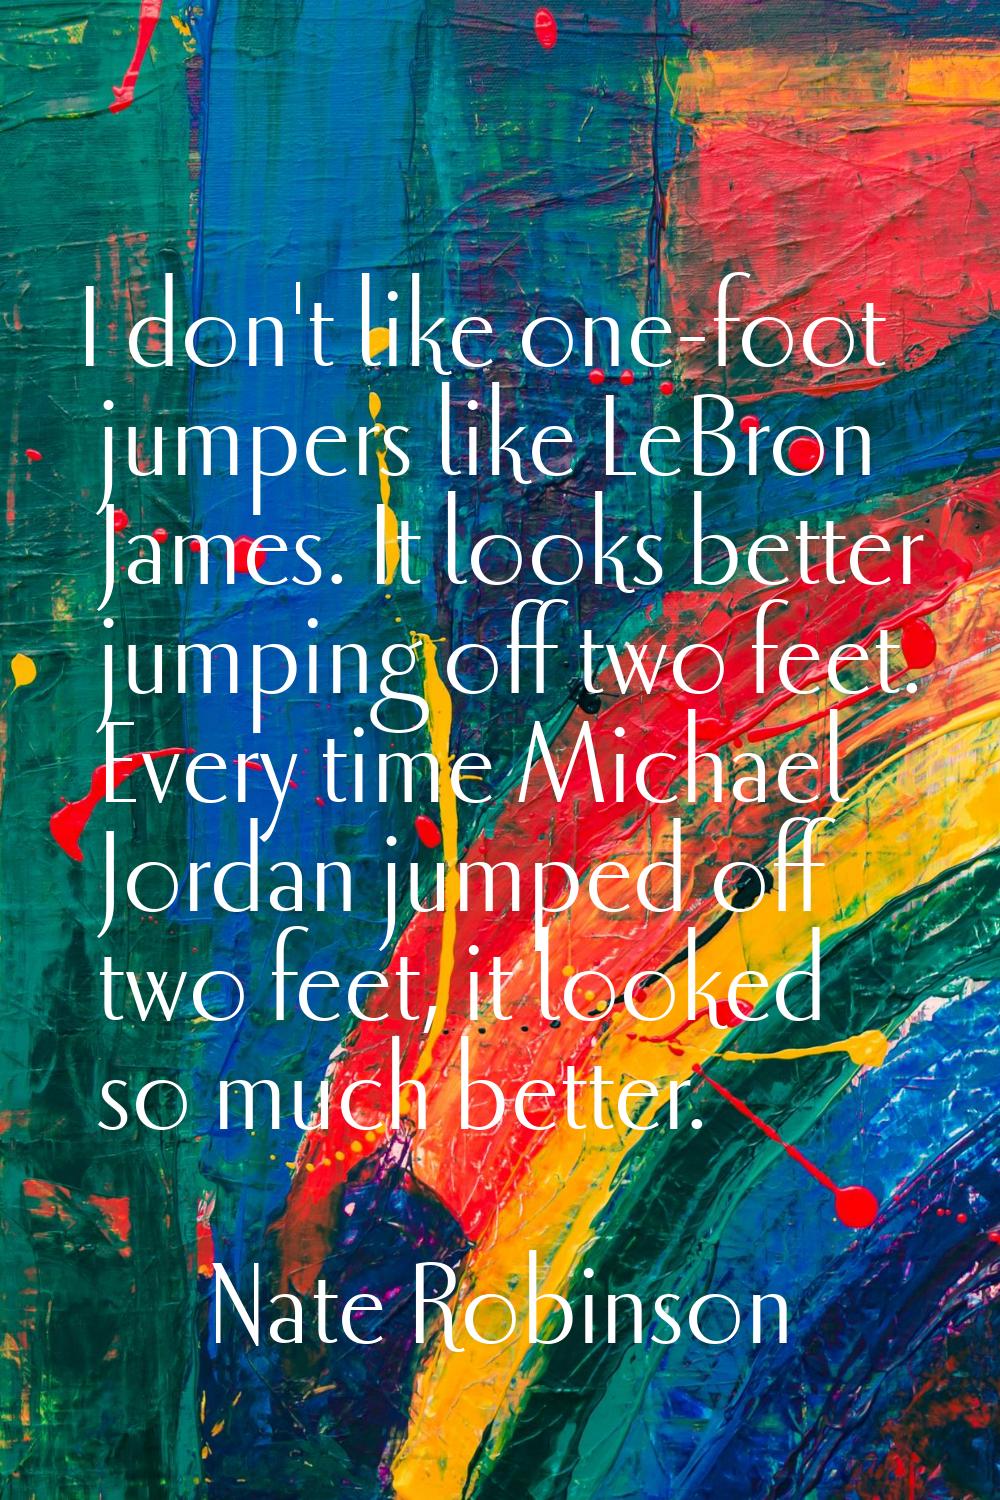 I don't like one-foot jumpers like LeBron James. It looks better jumping off two feet. Every time M